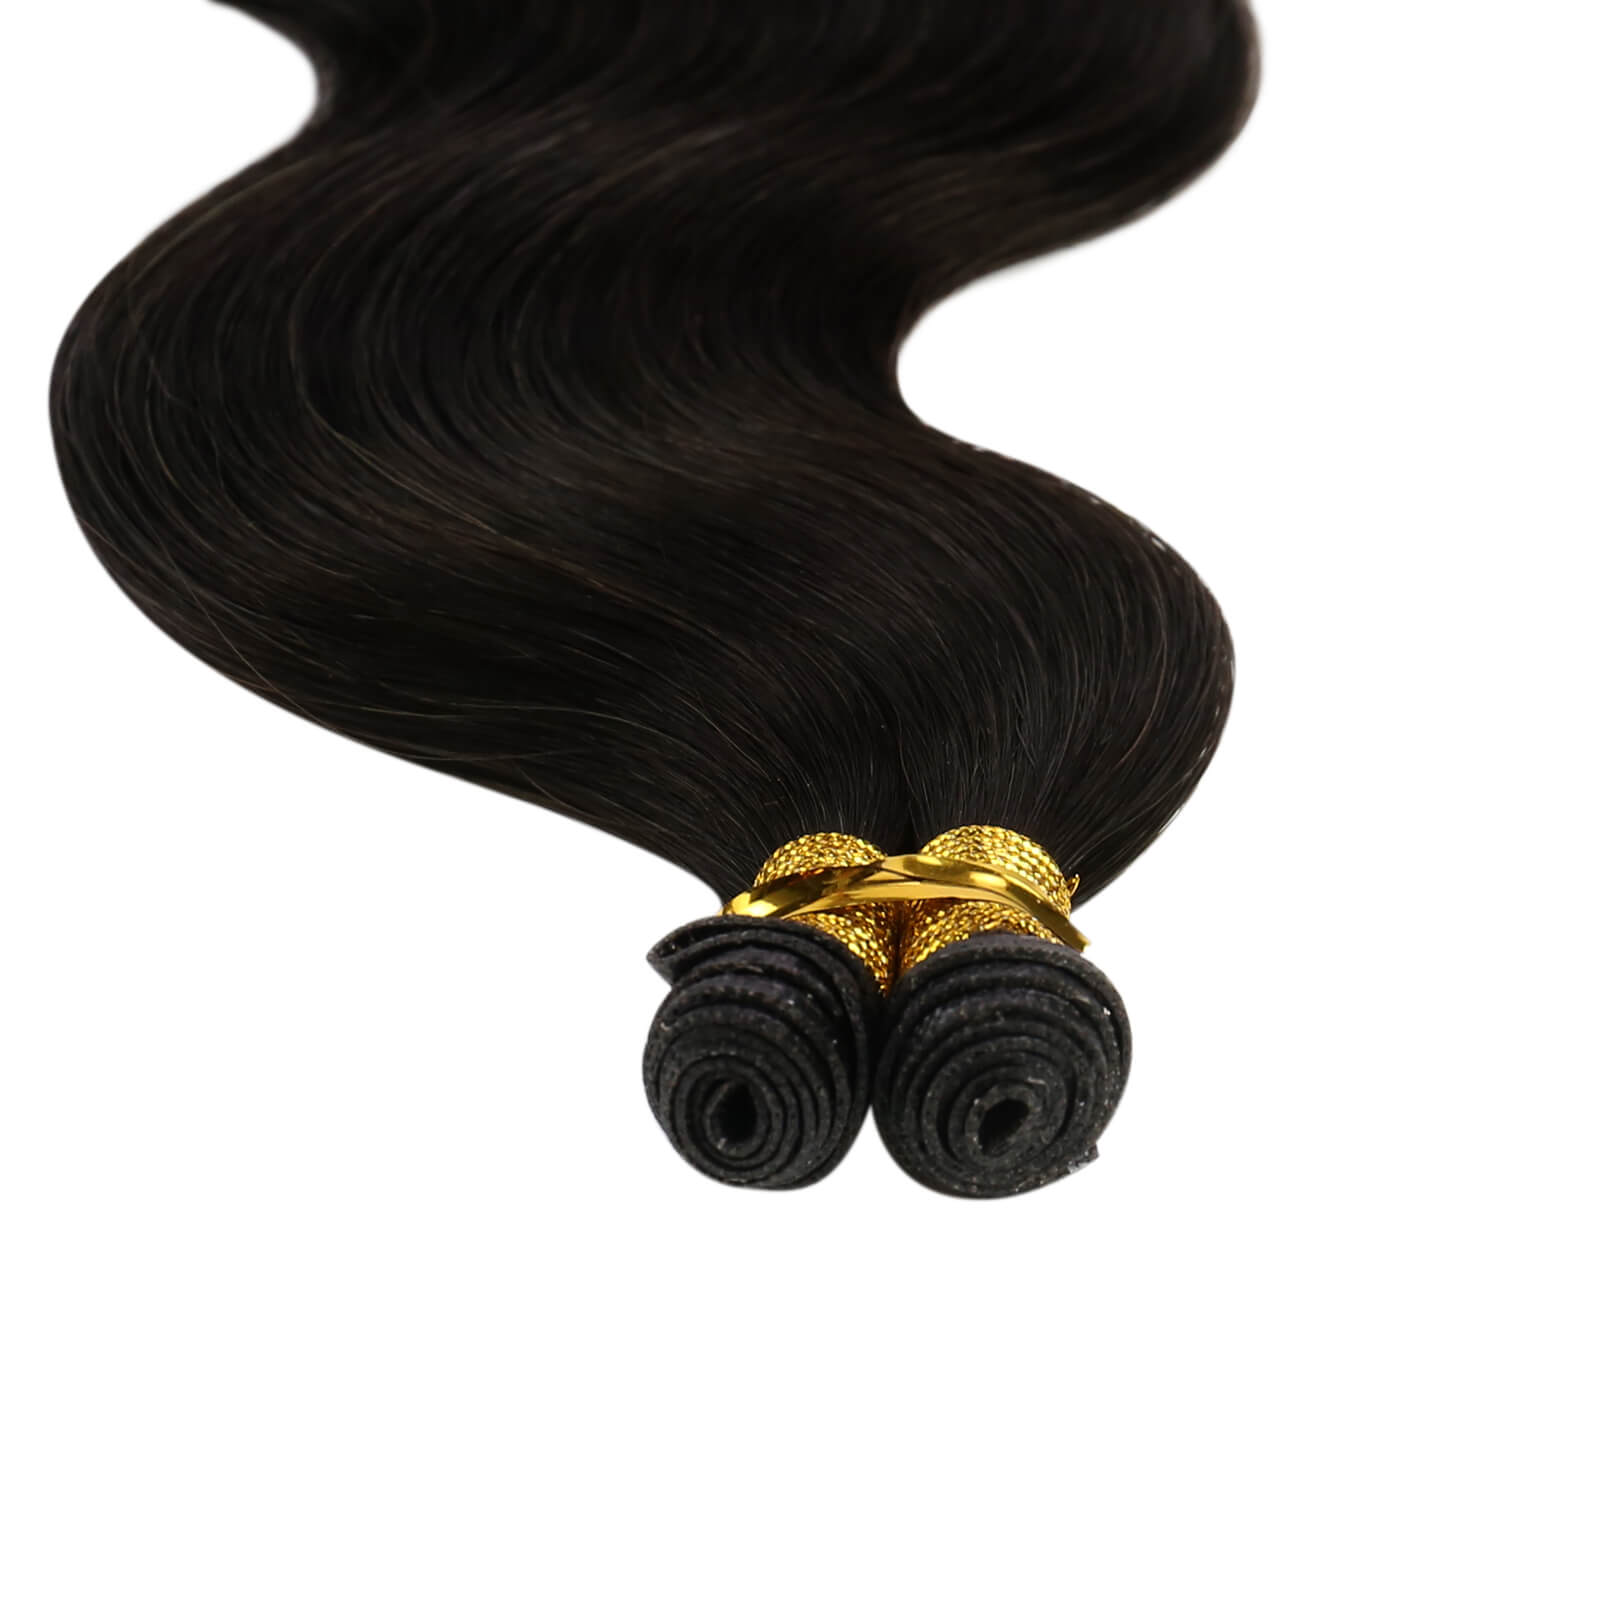 wave weft hair extensions genius weft natural black color